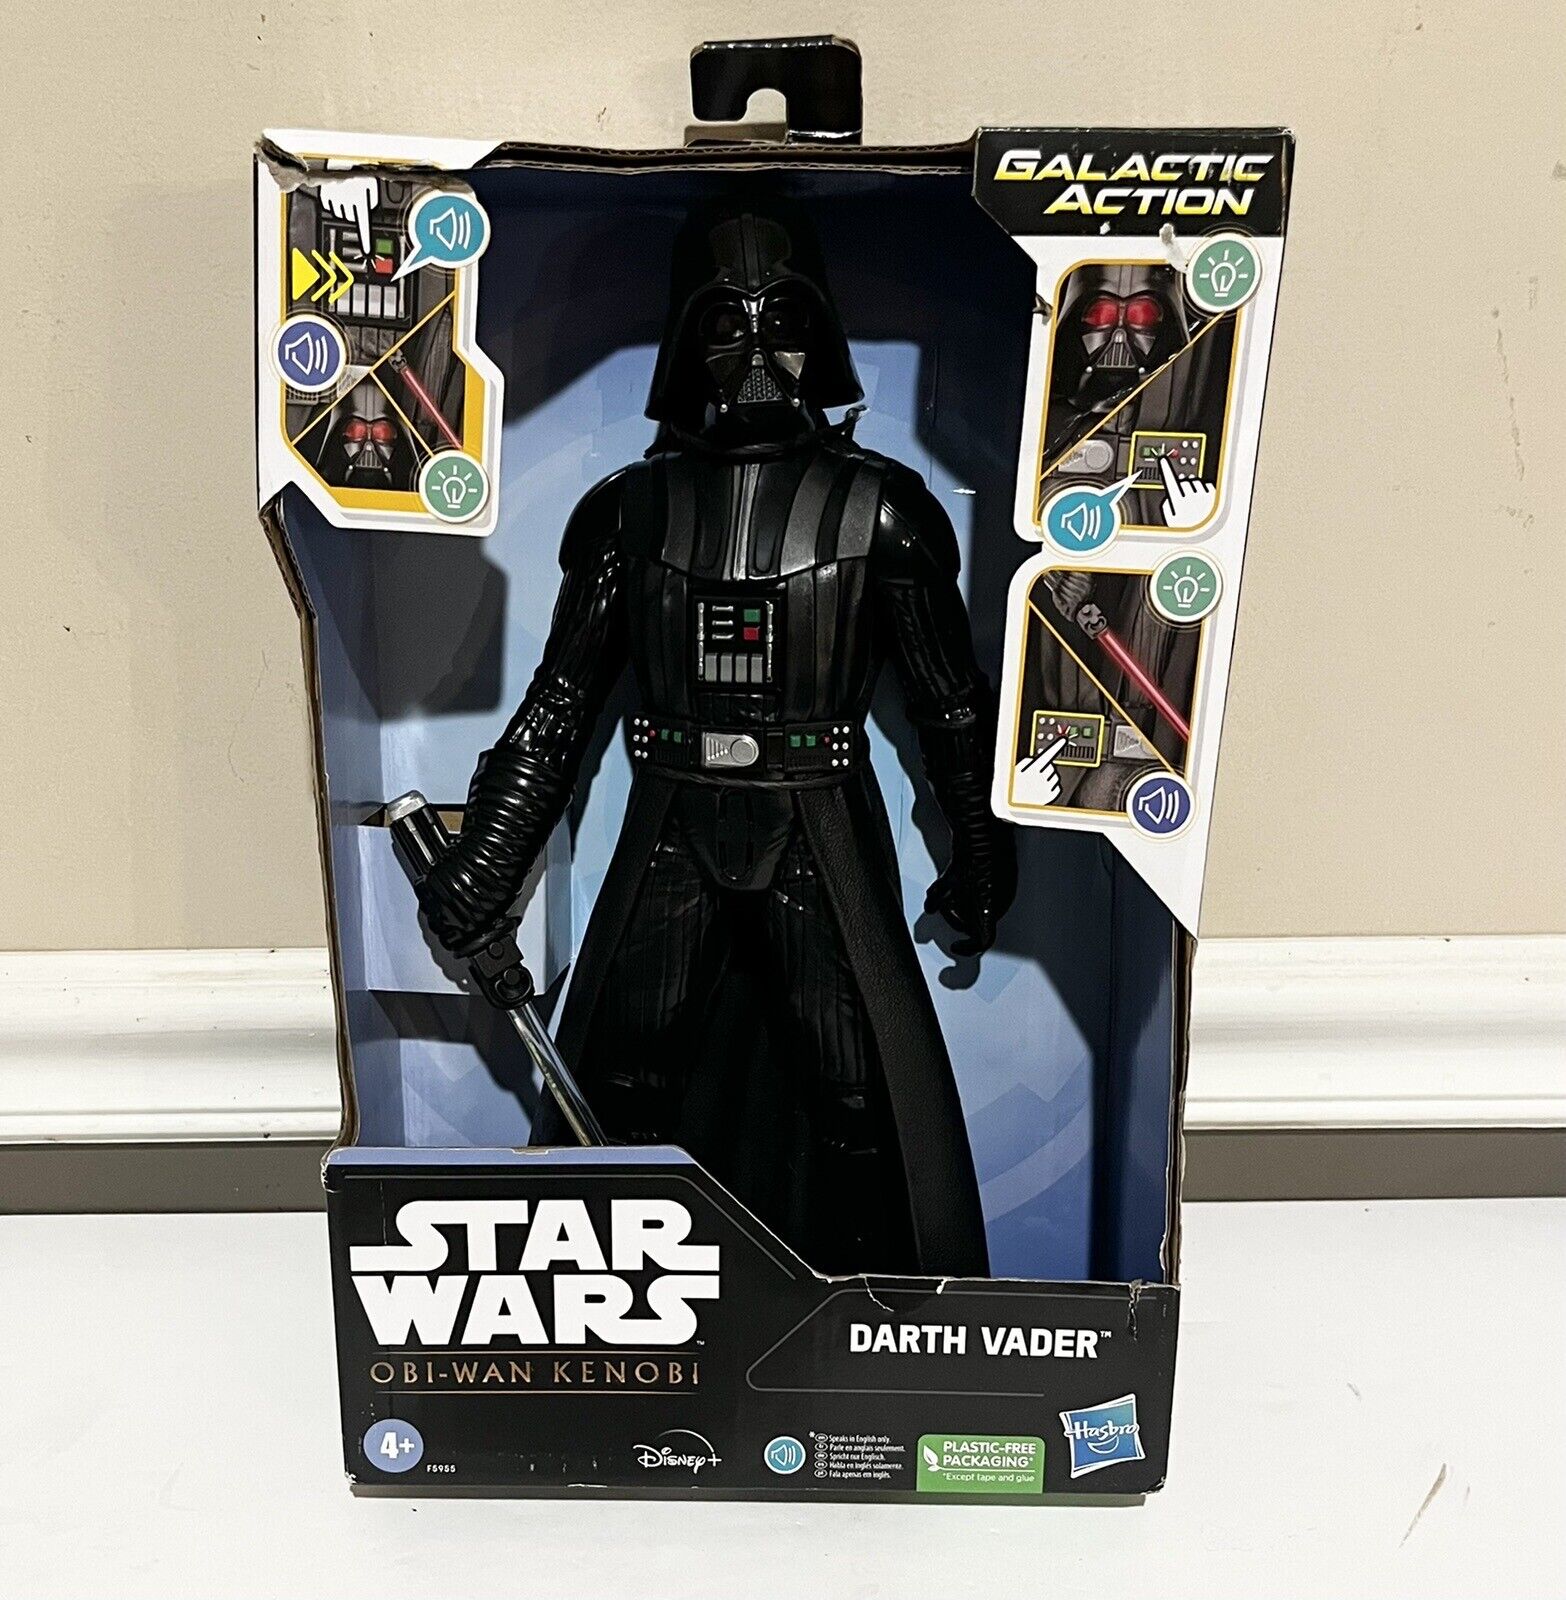 STAR WARS - GALACTIC ACTION DARTH VADER - Electronic 12-inch Action Figure New * Hasbro F5955